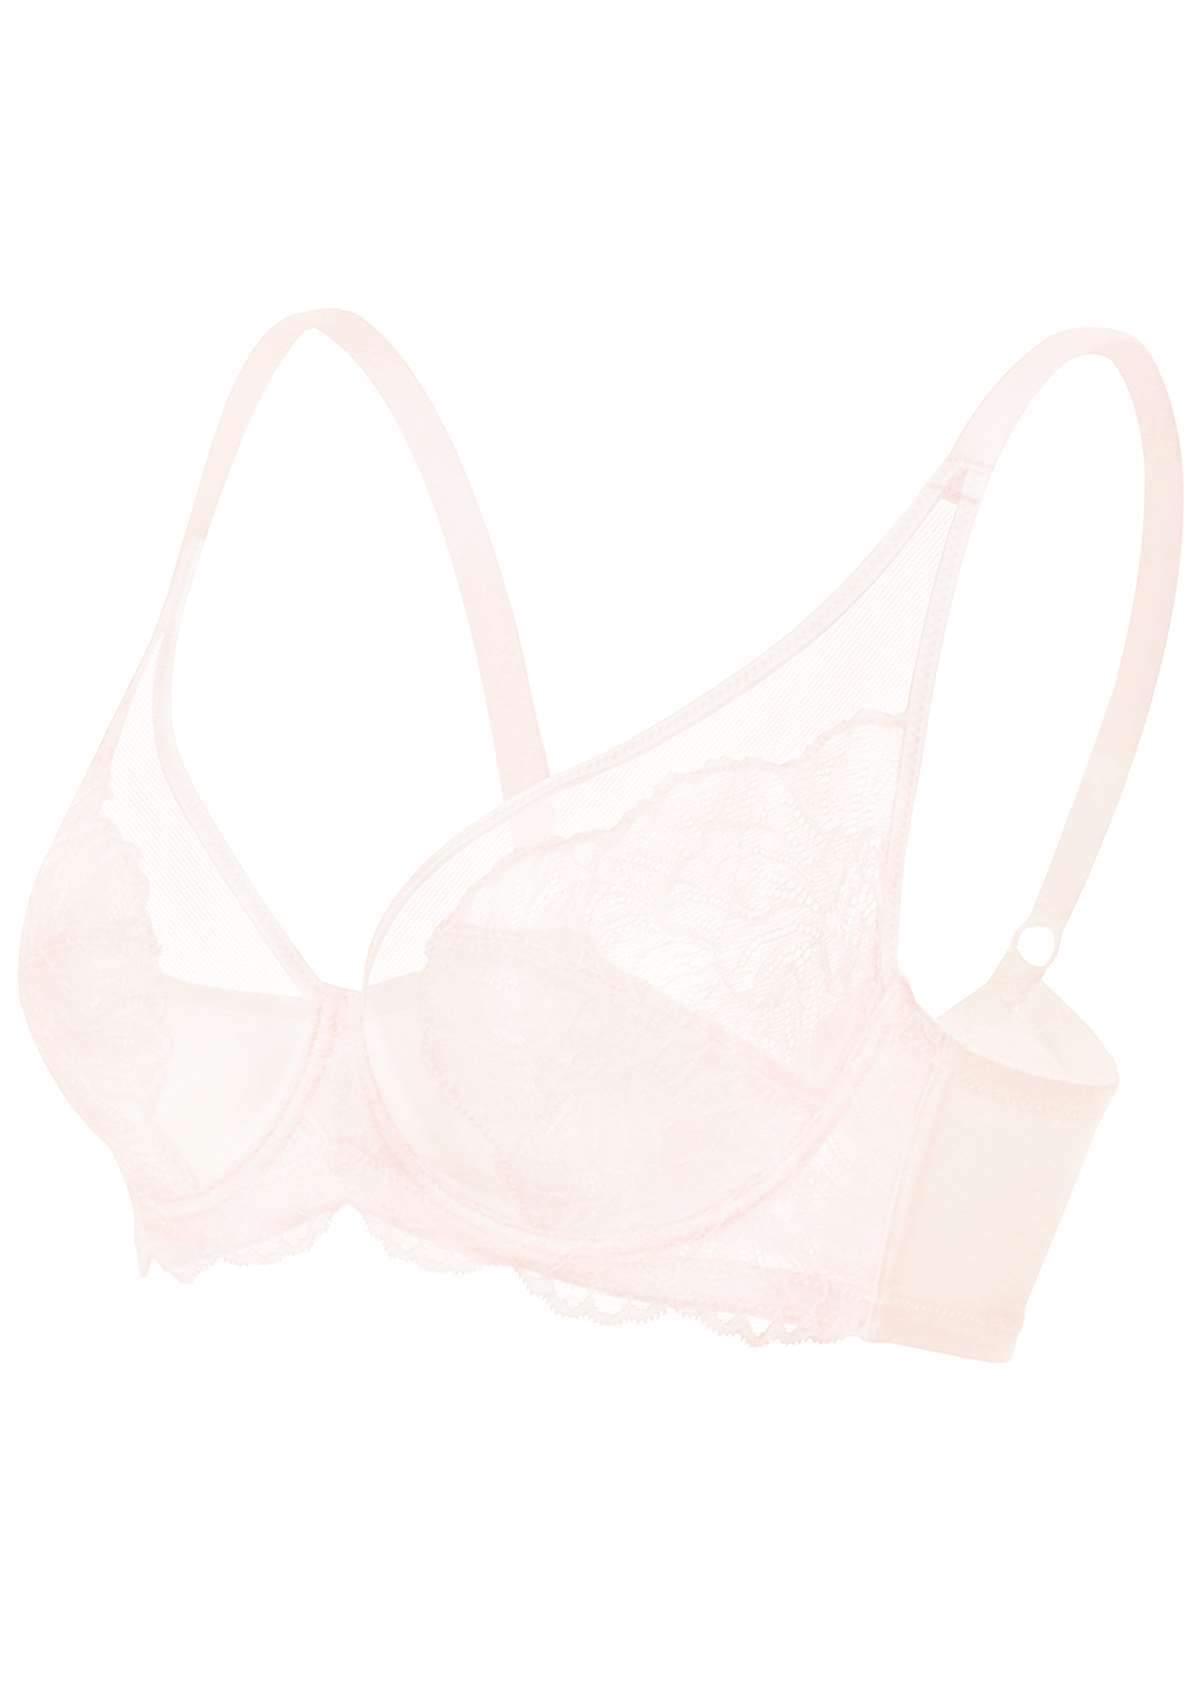 HSIA Blossom Sheer Lace Bra: Comfortable Underwire Bra For Big Busts - White / 34 / C